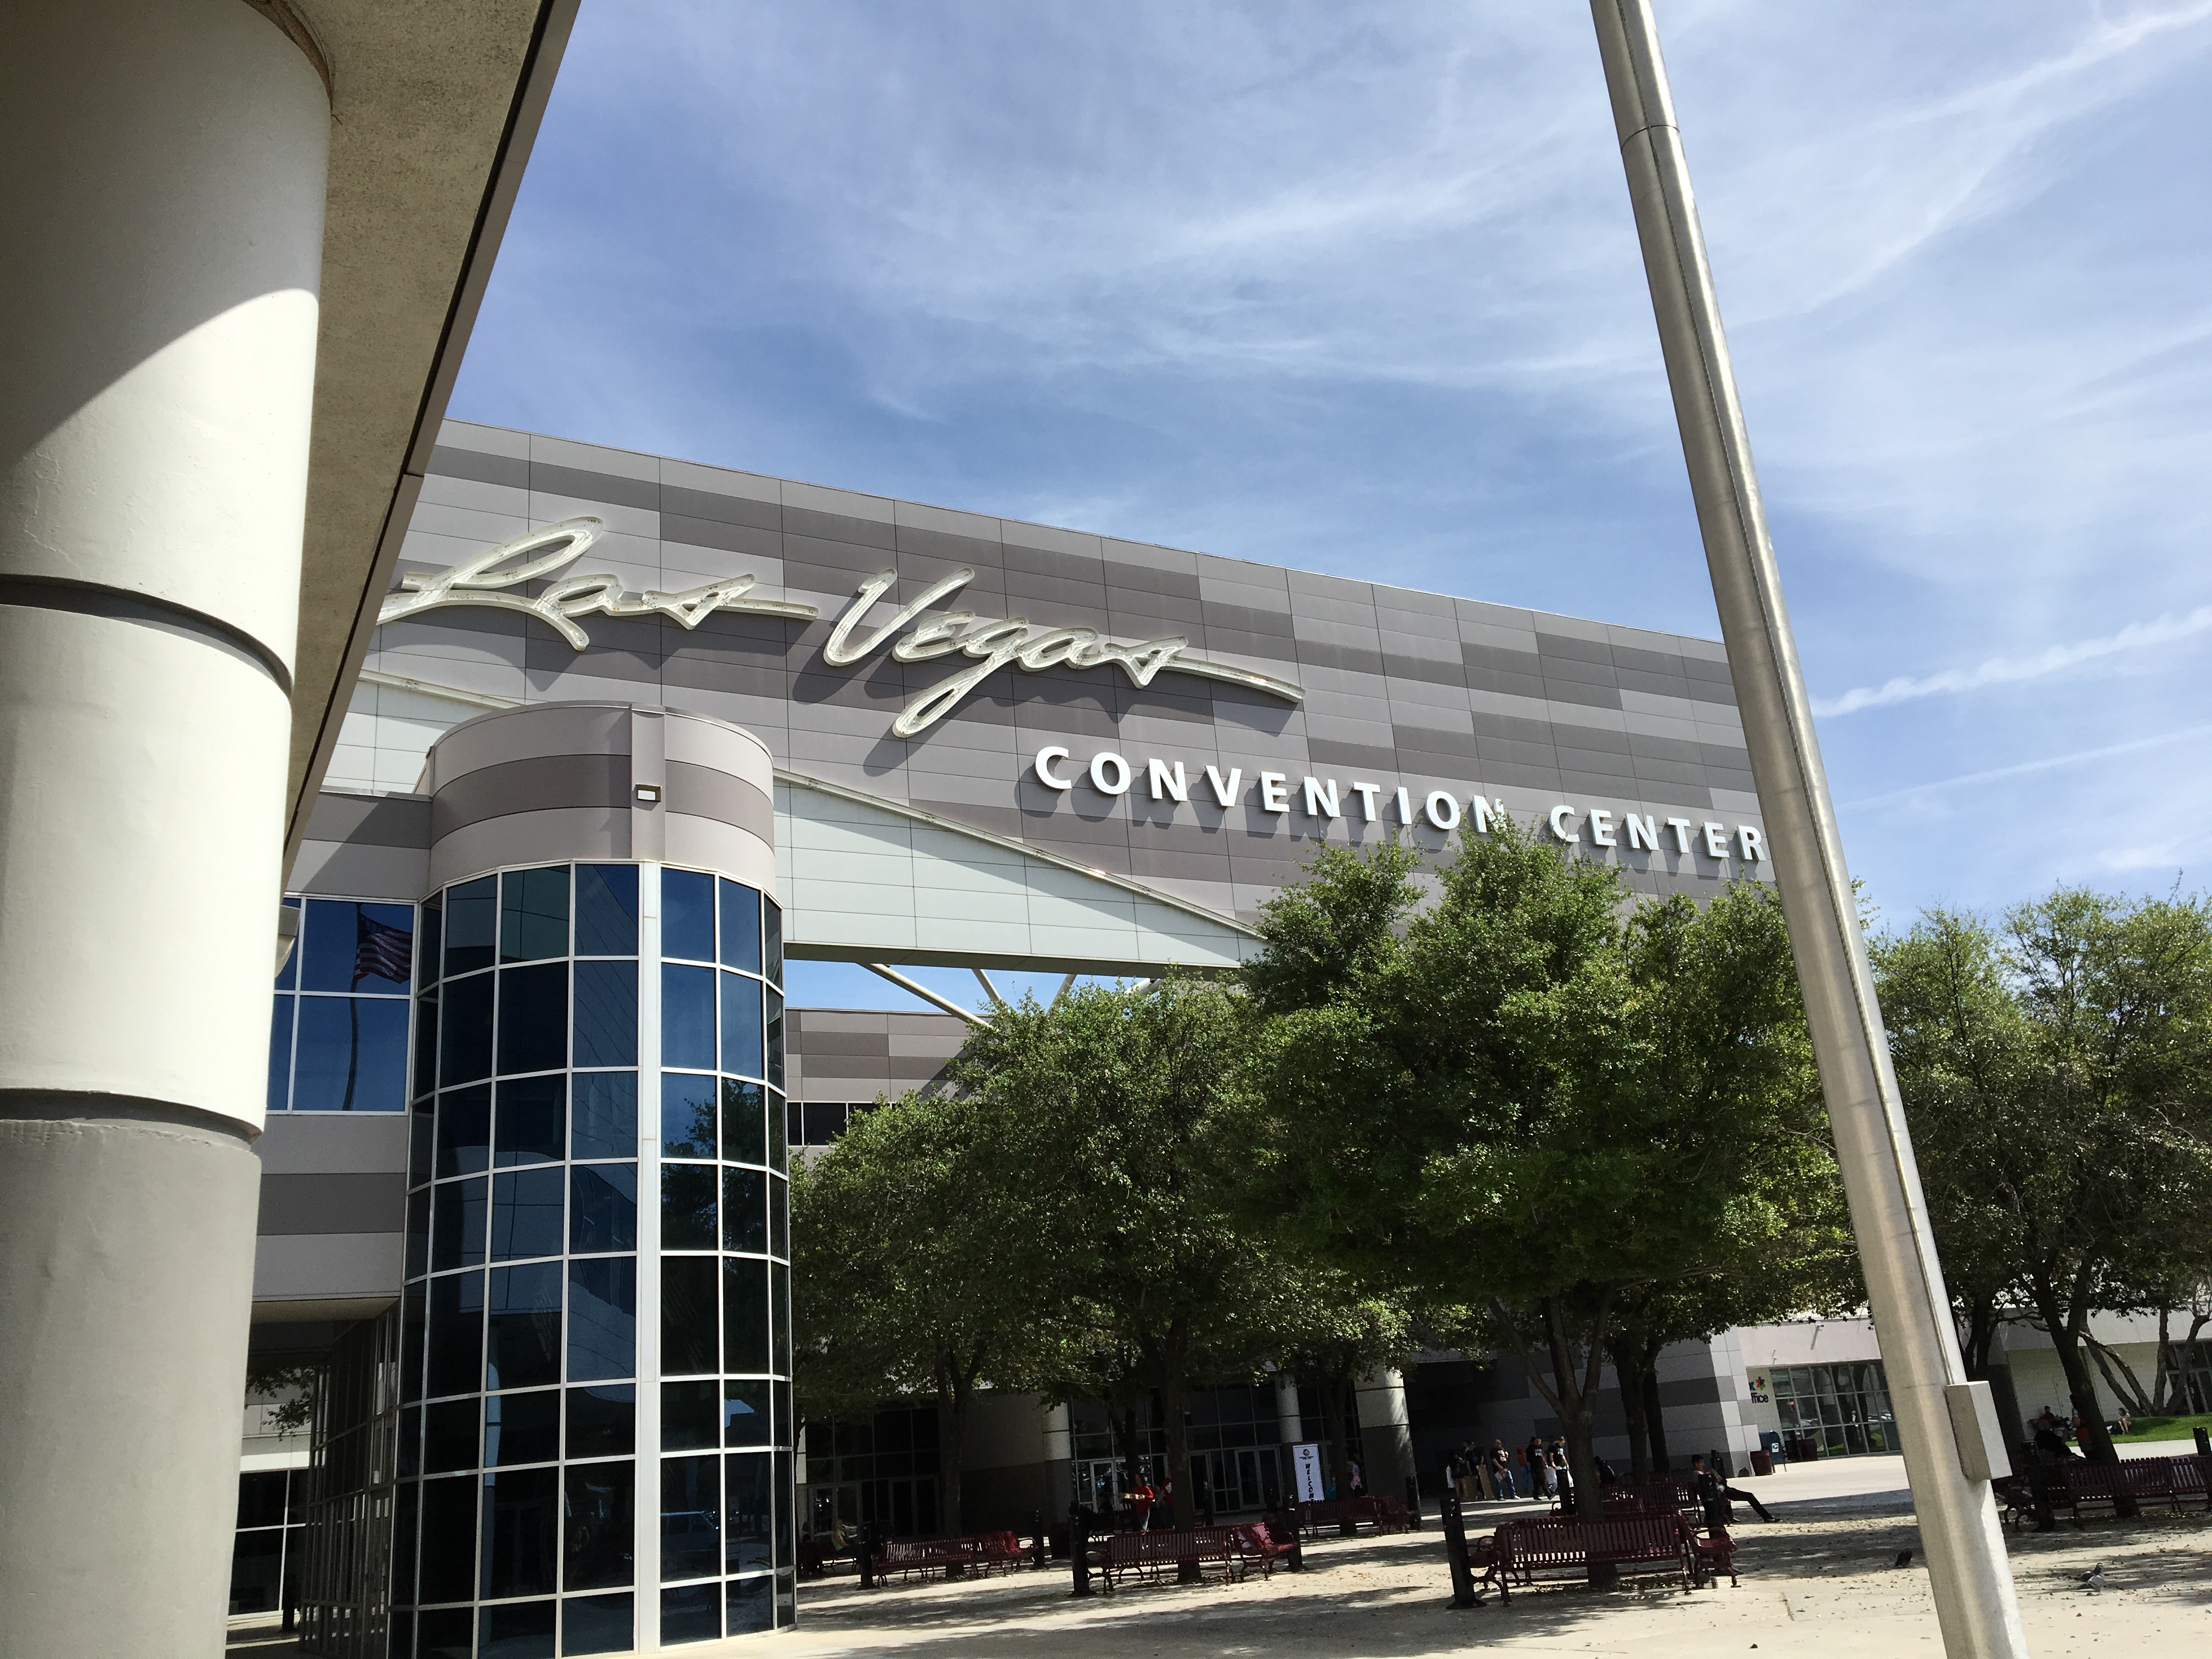 A beautiful day for a trip to the convention center